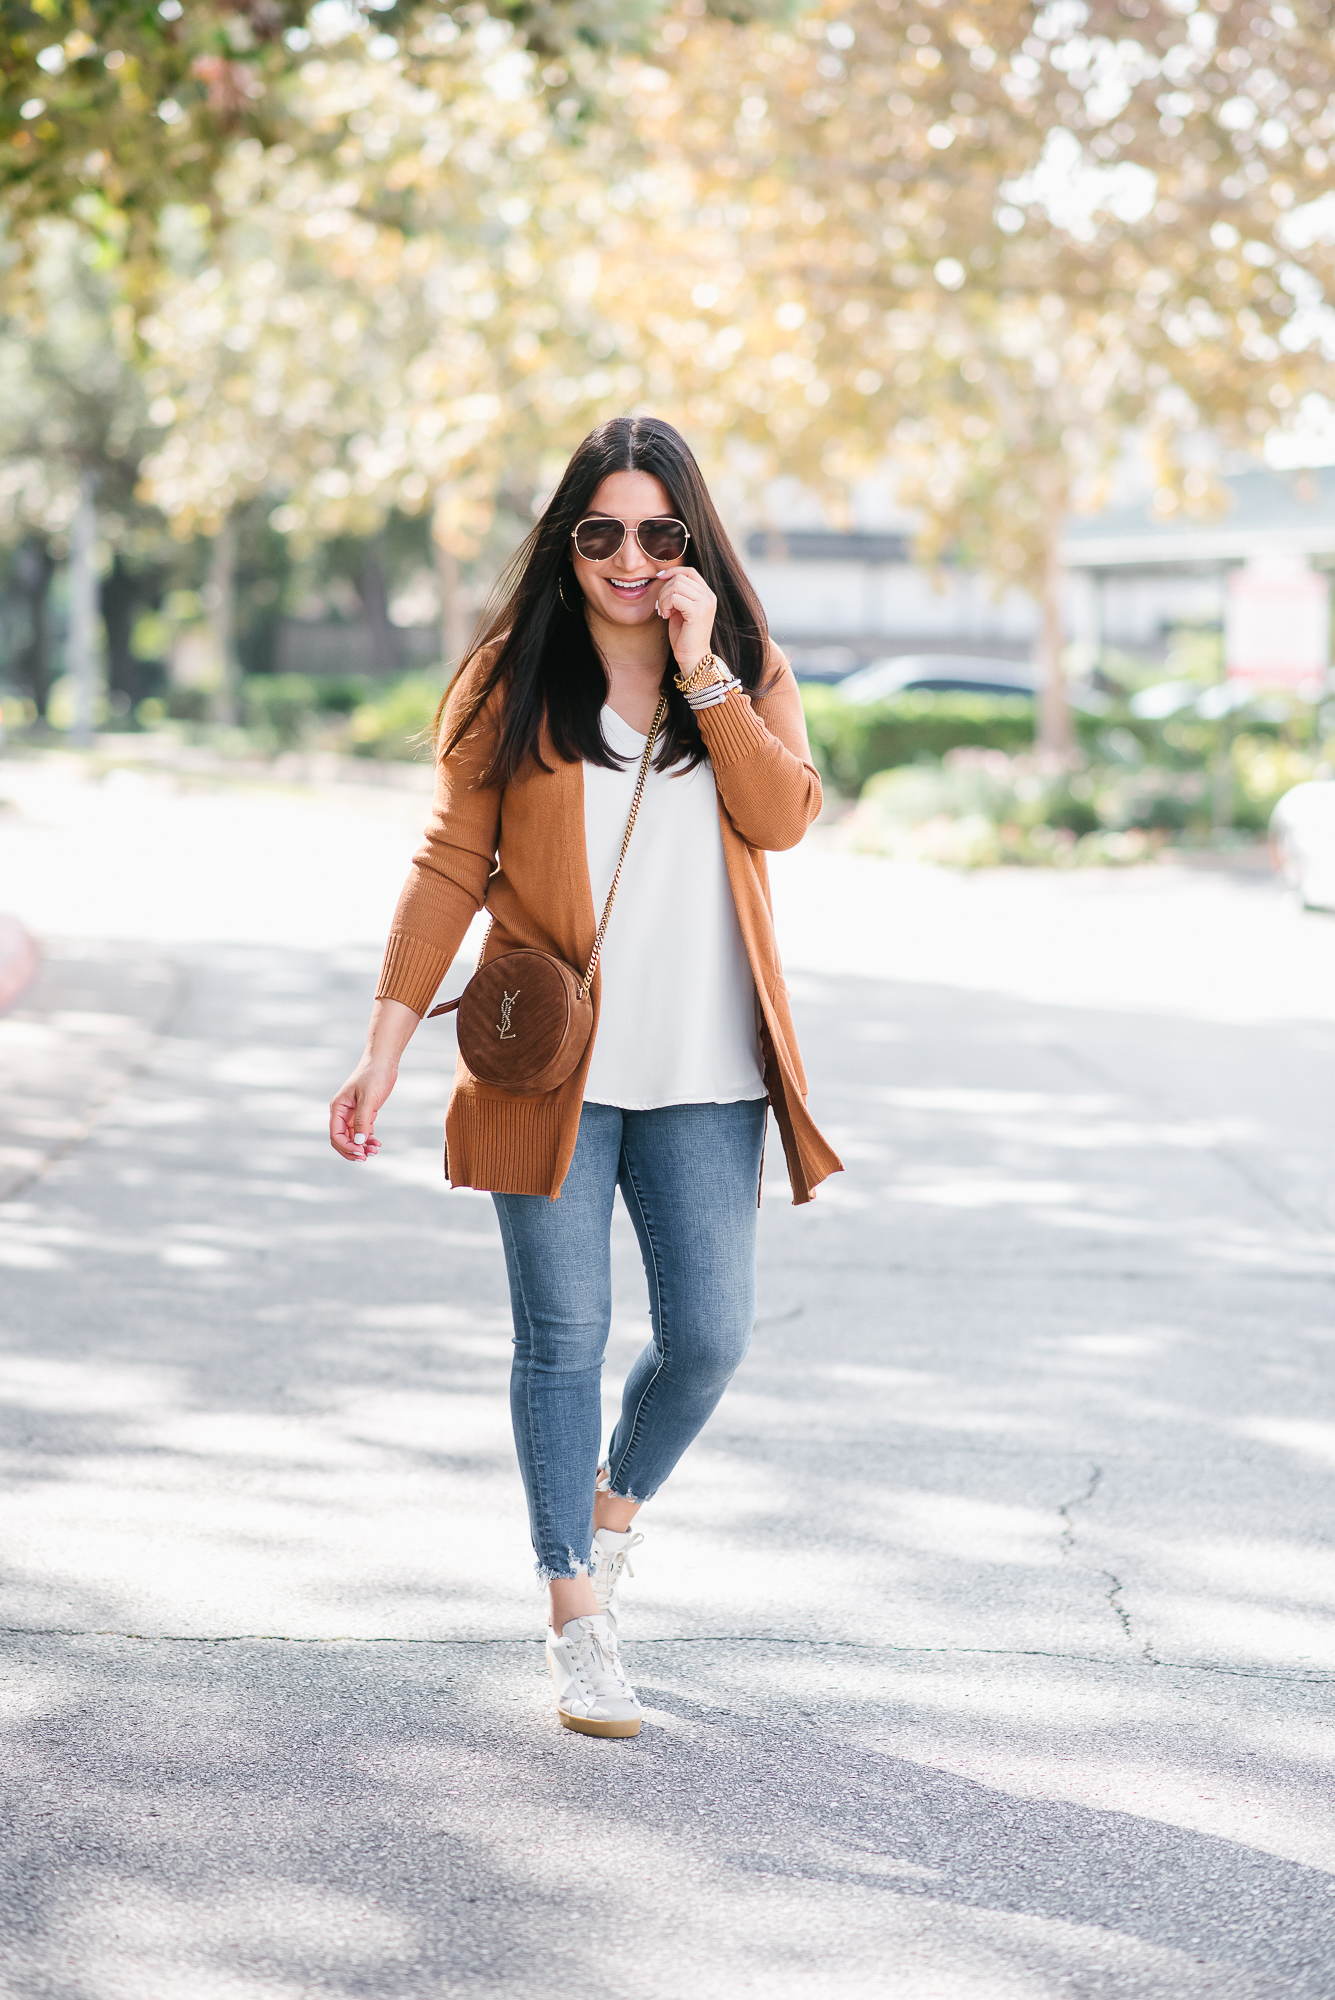 Cardigan Weather, Yes Please | LuxMommy | Houston Fashion, Beauty and ...